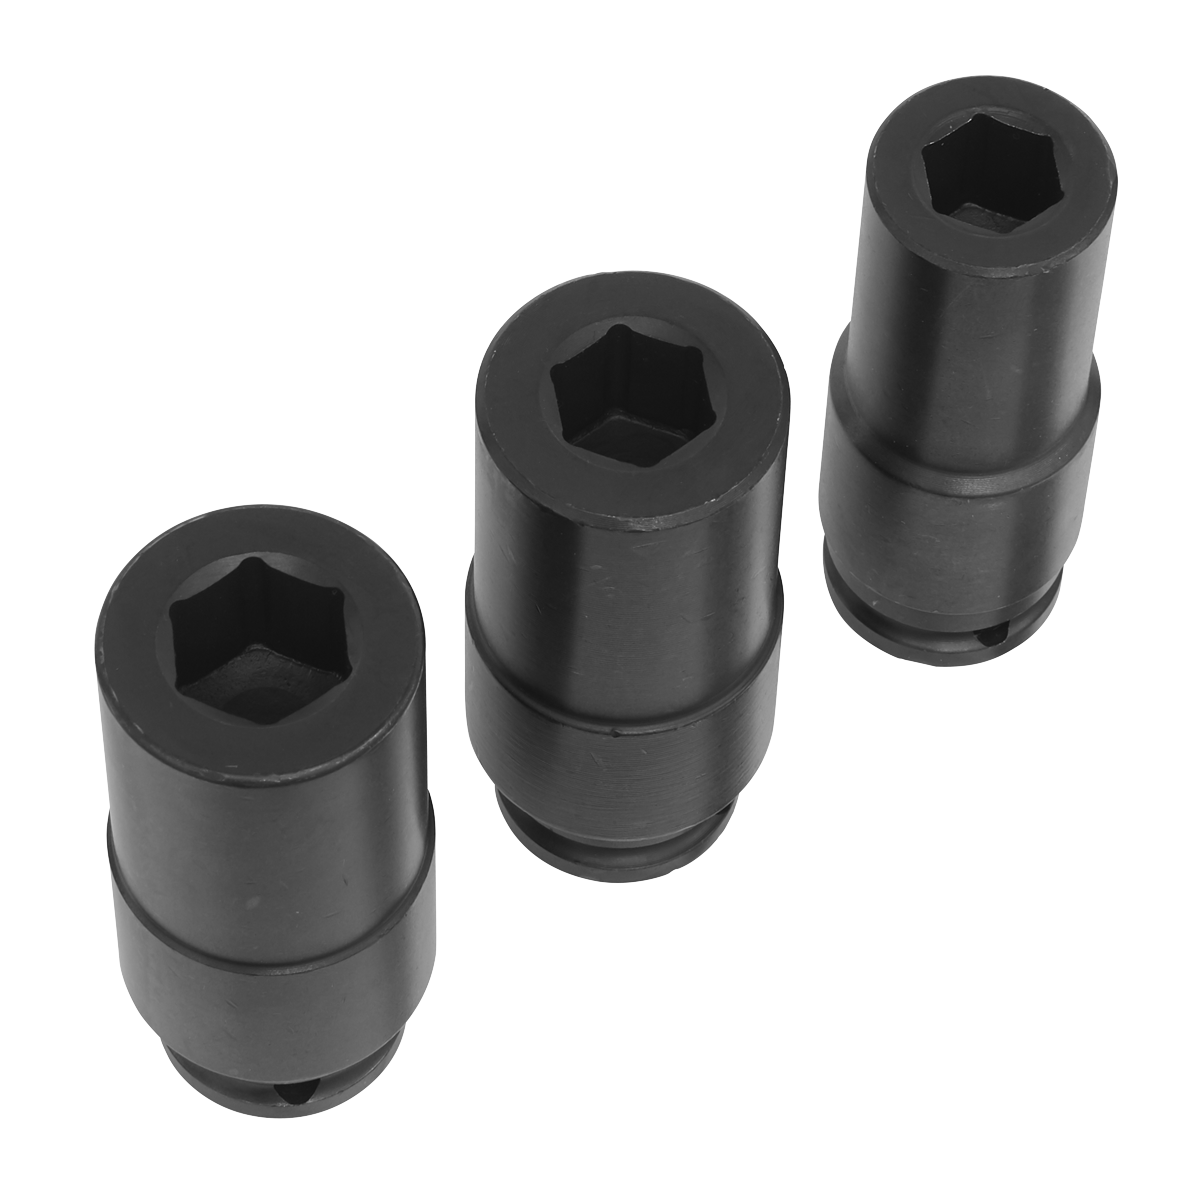 Sealey SX319 Deep Weighted Impact Socket Set 1/2"Sq Drive 3pc